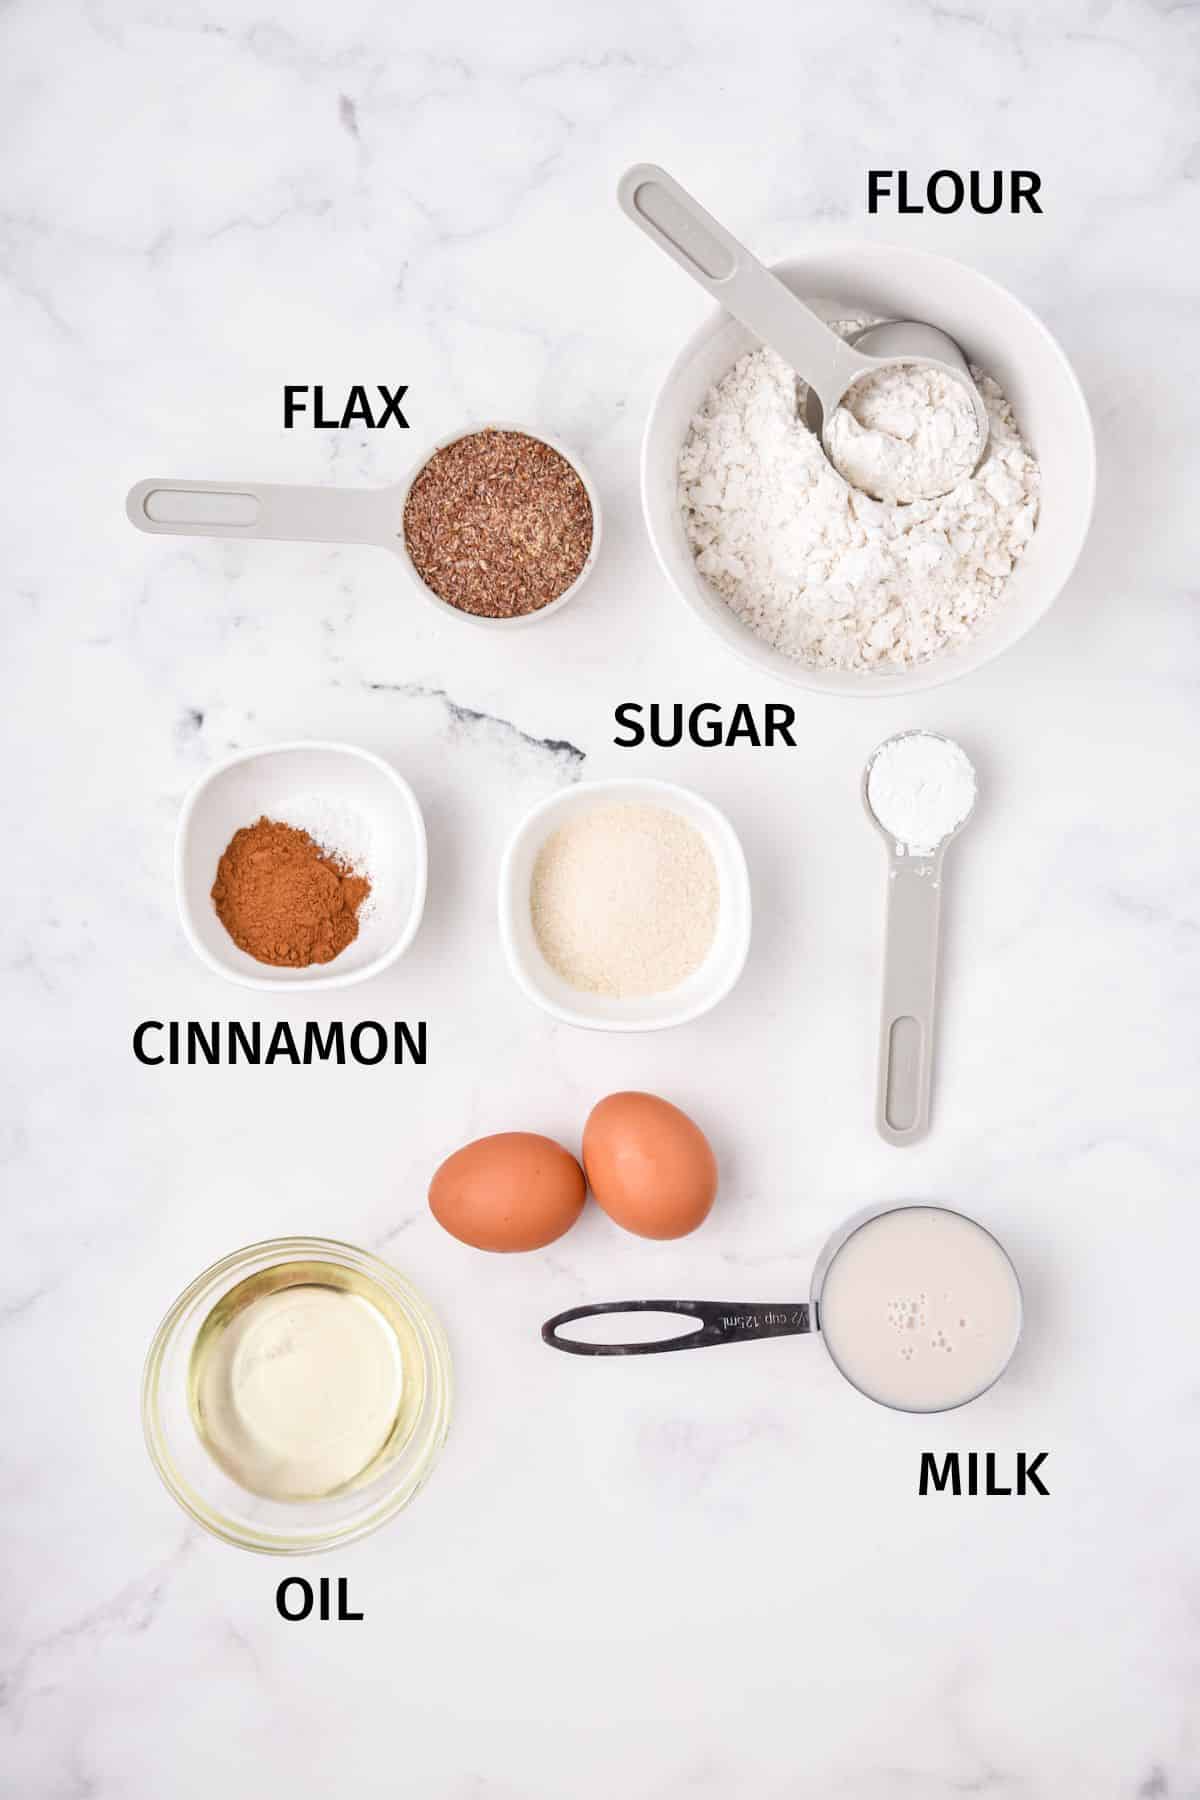 Ingredients to make flax muffins in small bowls on a white surface.